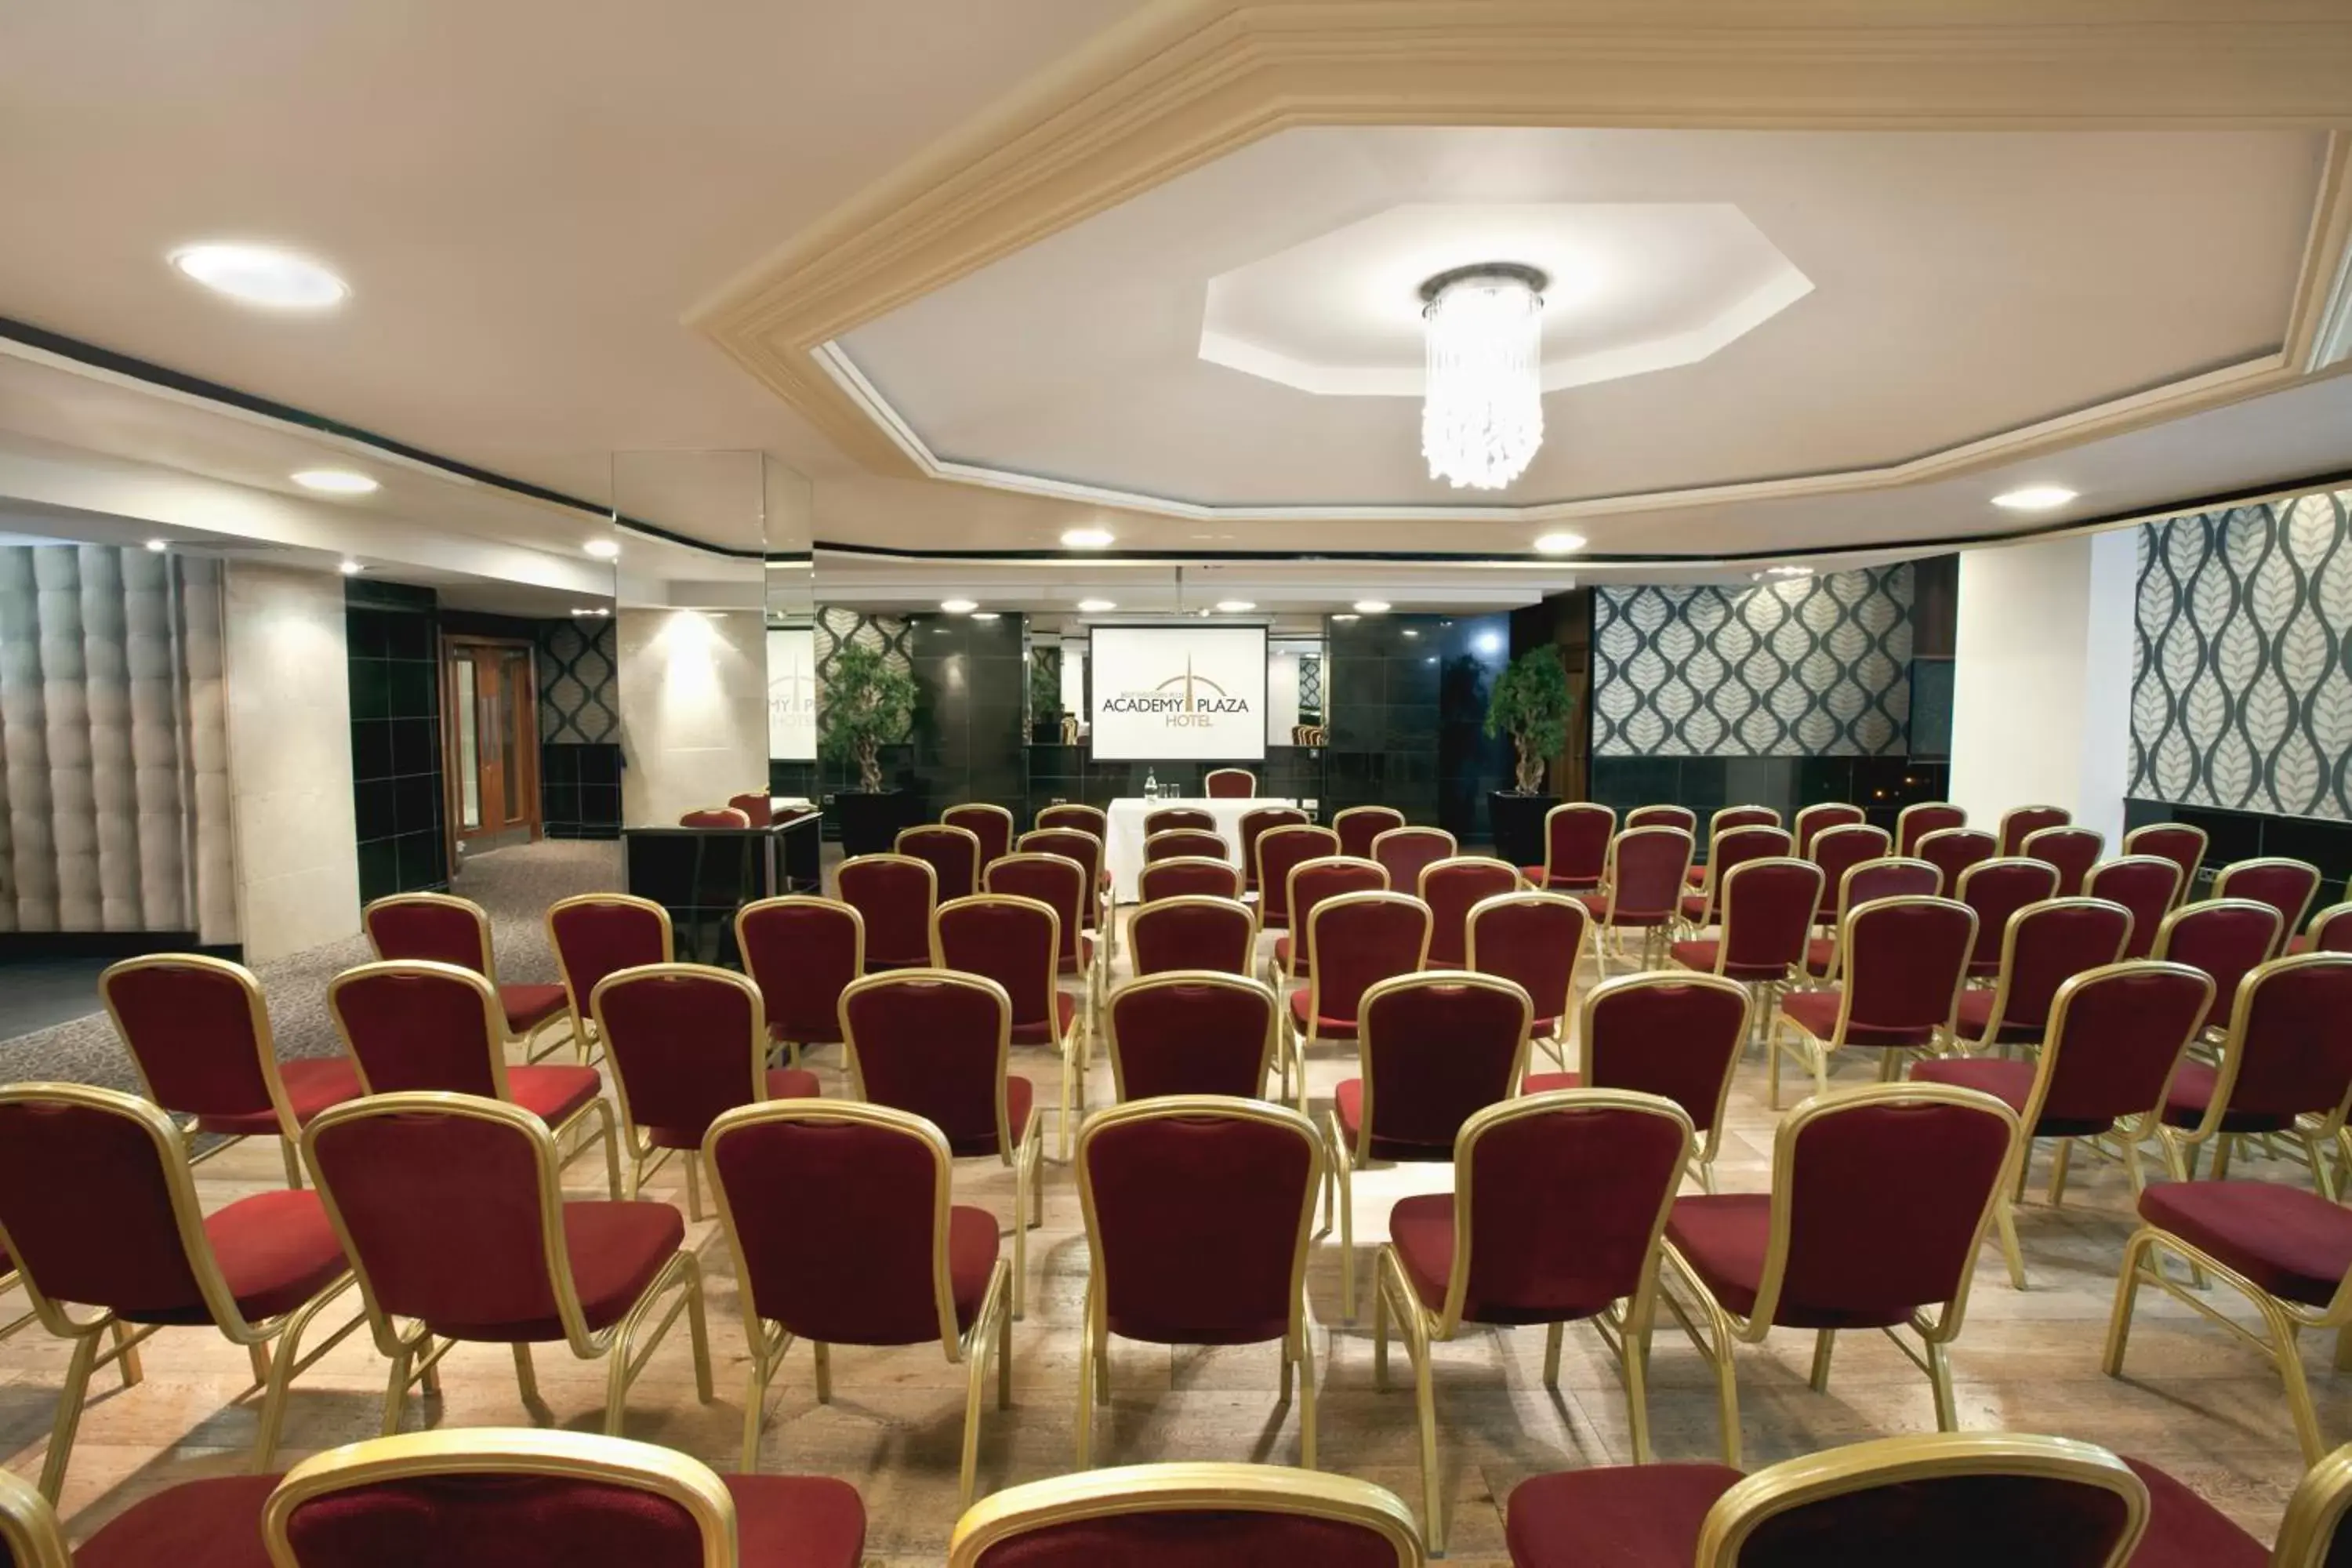 Meeting/conference room, Business Area/Conference Room in Academy Plaza Hotel